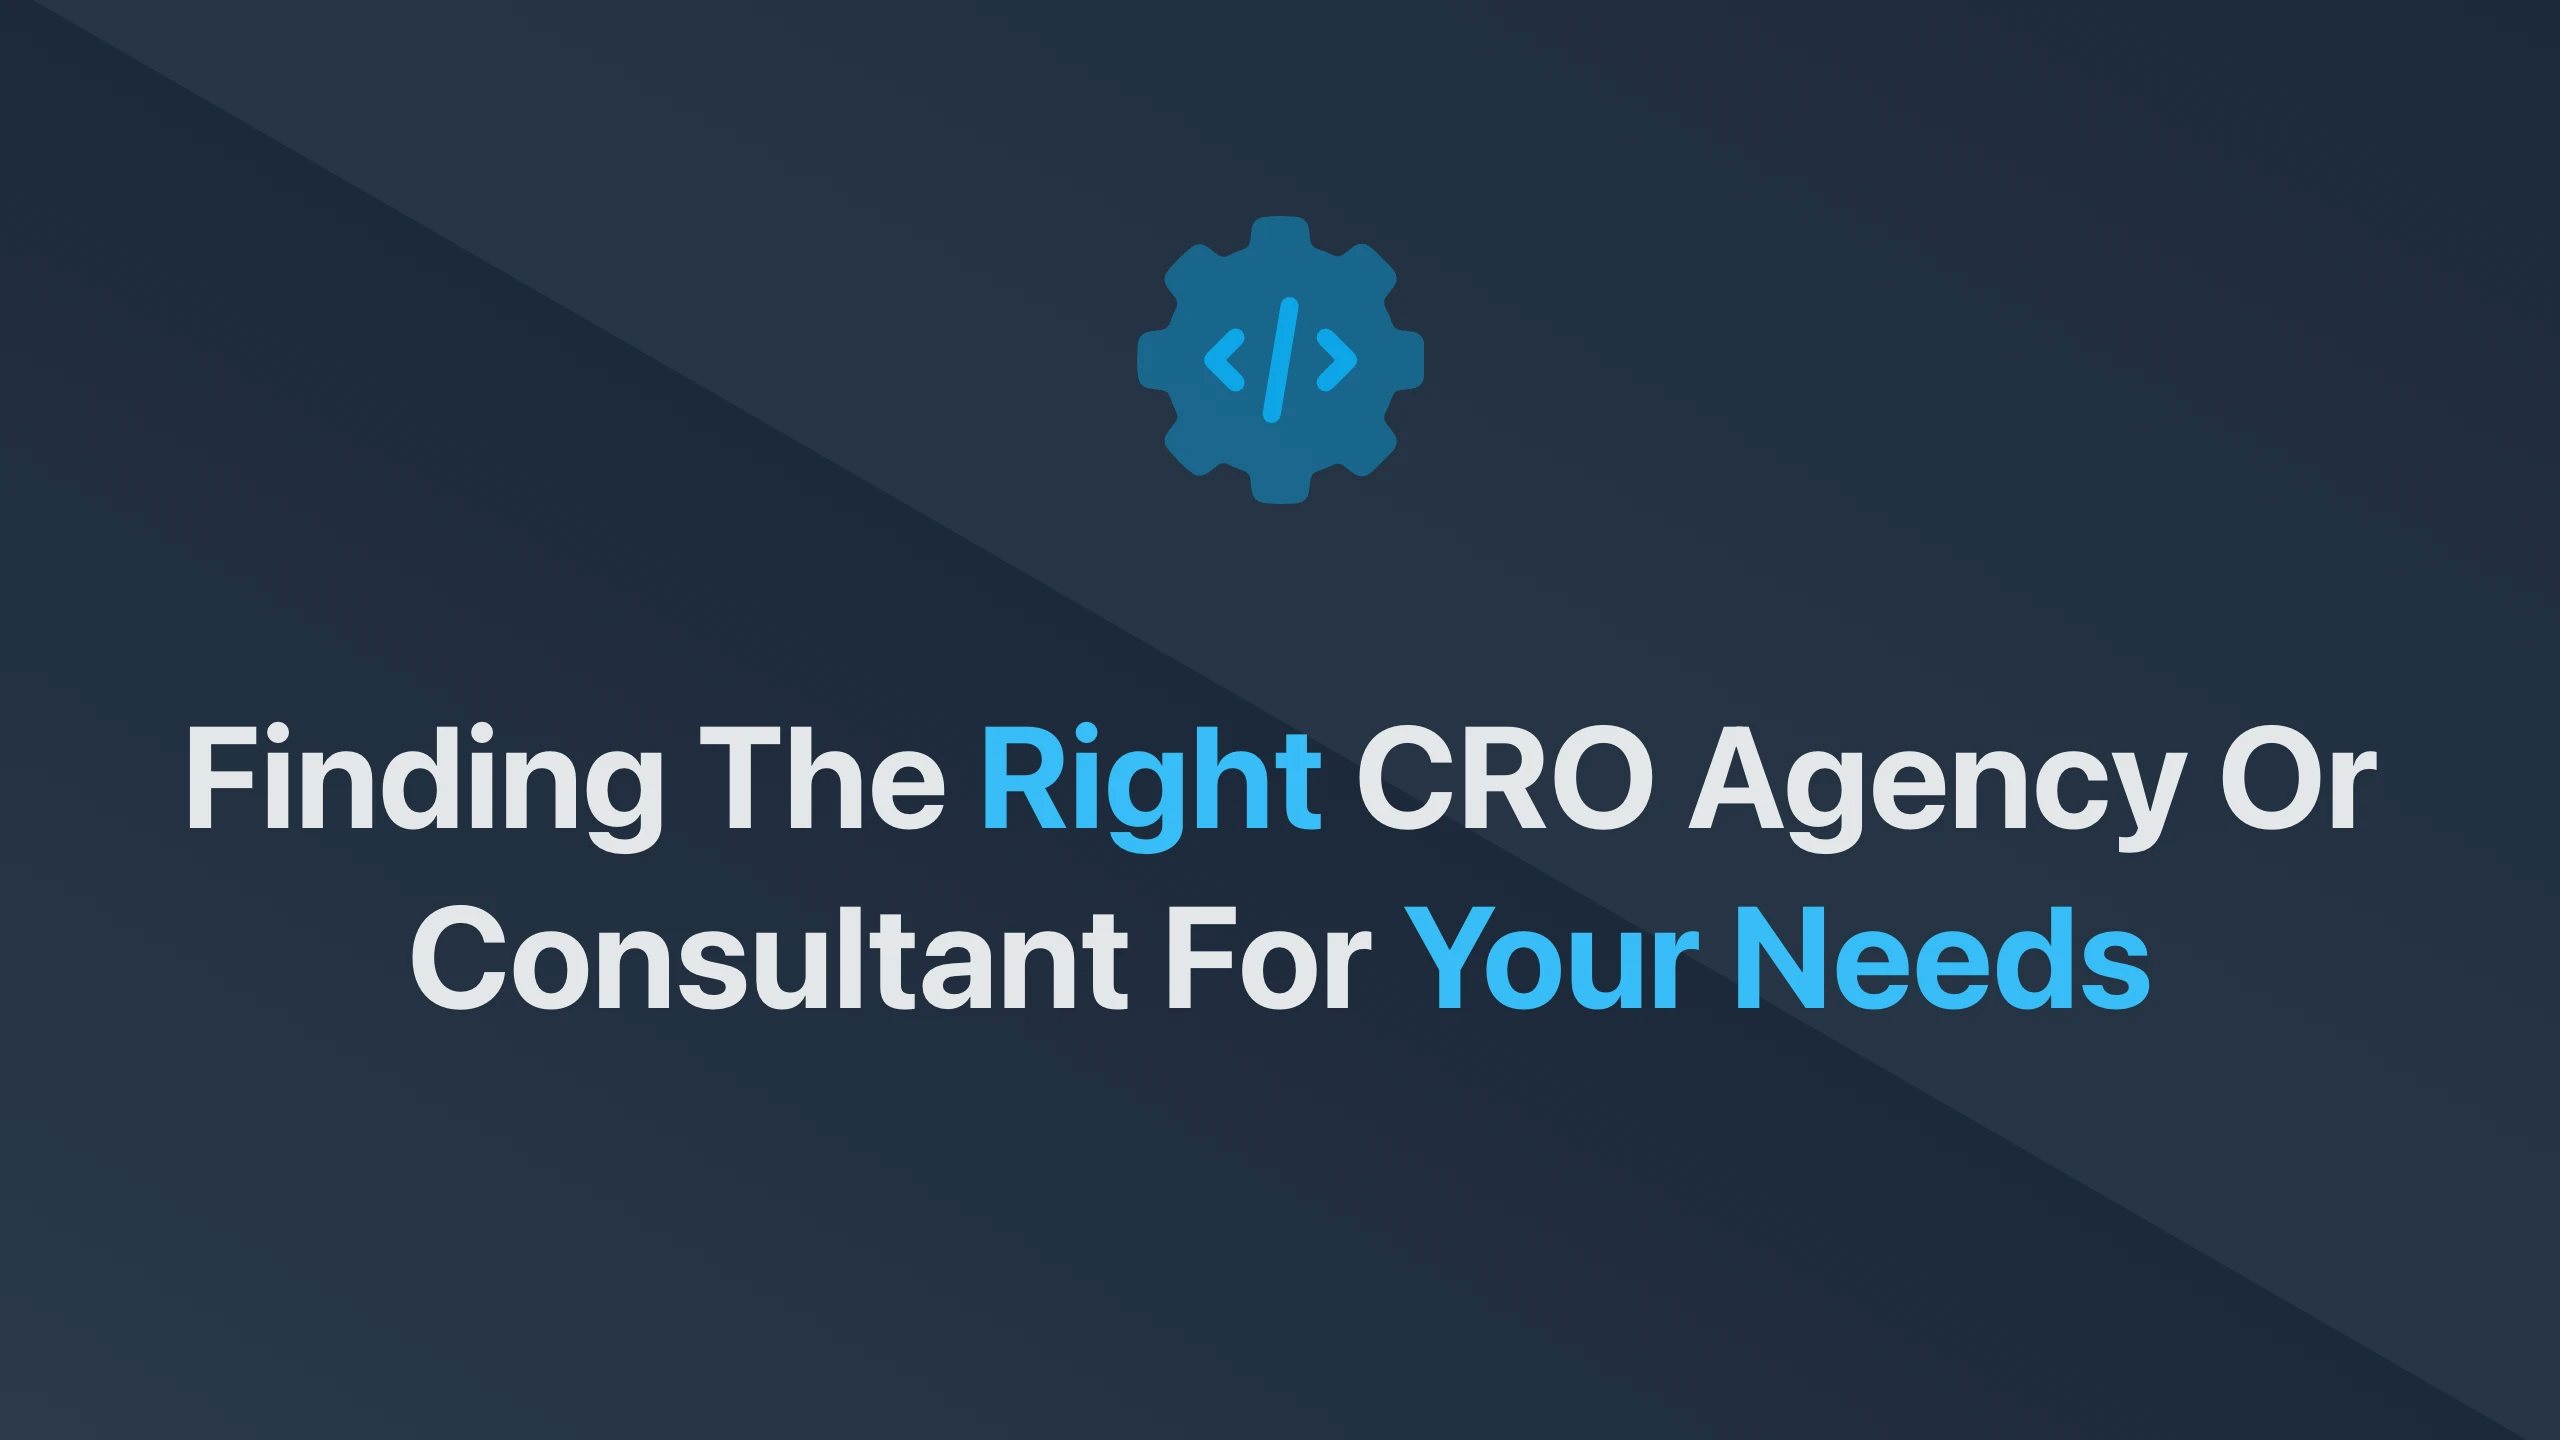 Cover Image for Finding the Right CRO Agency or Consultant for Your Needs